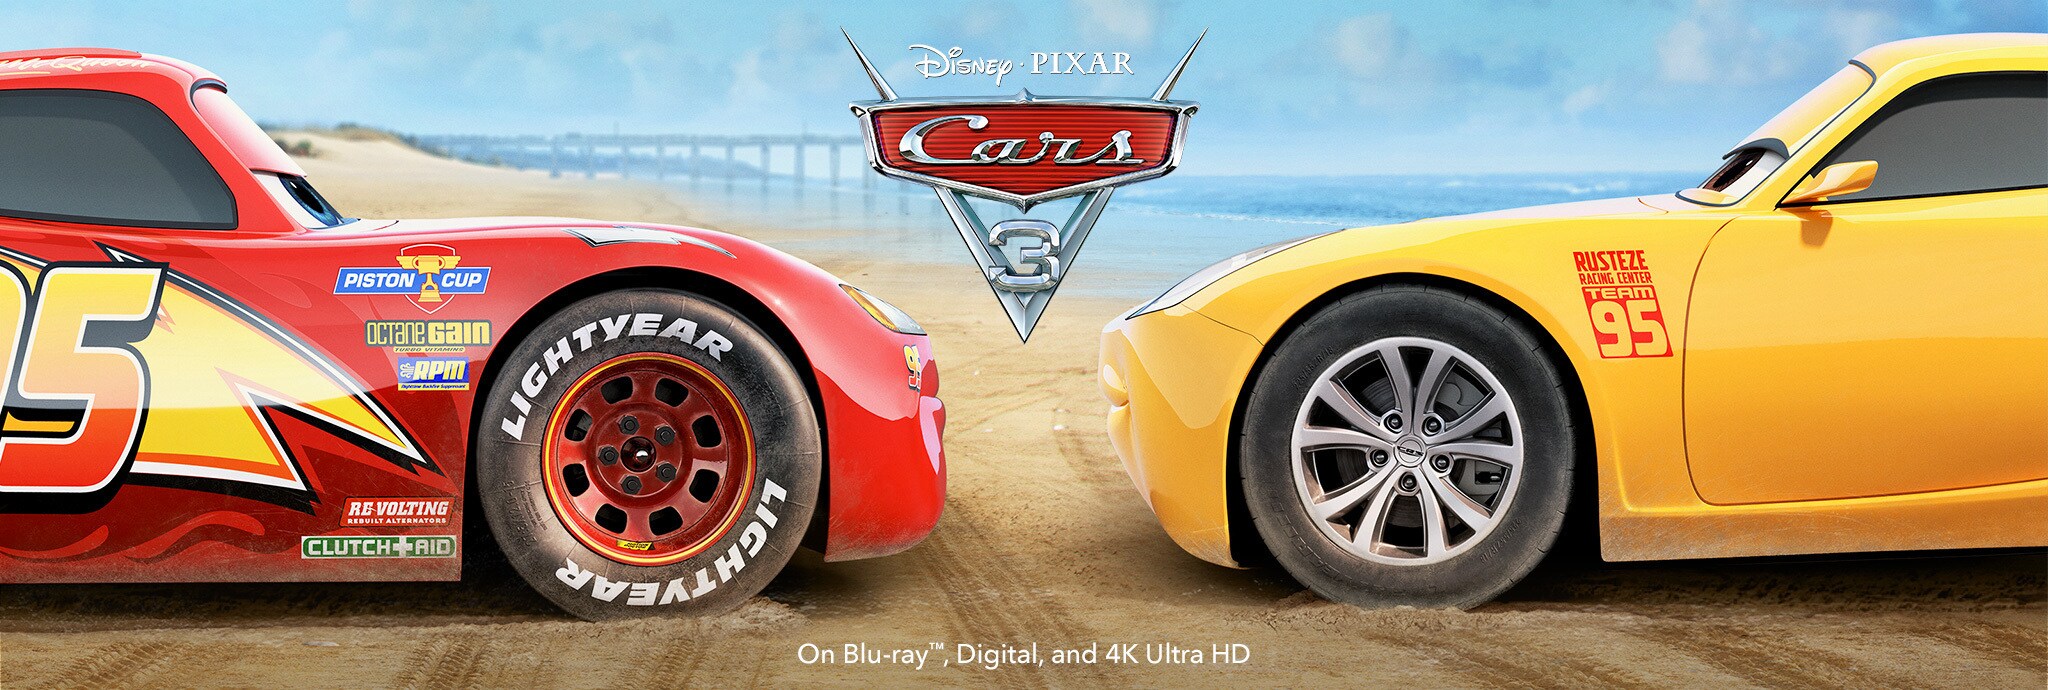 download cars movie songs